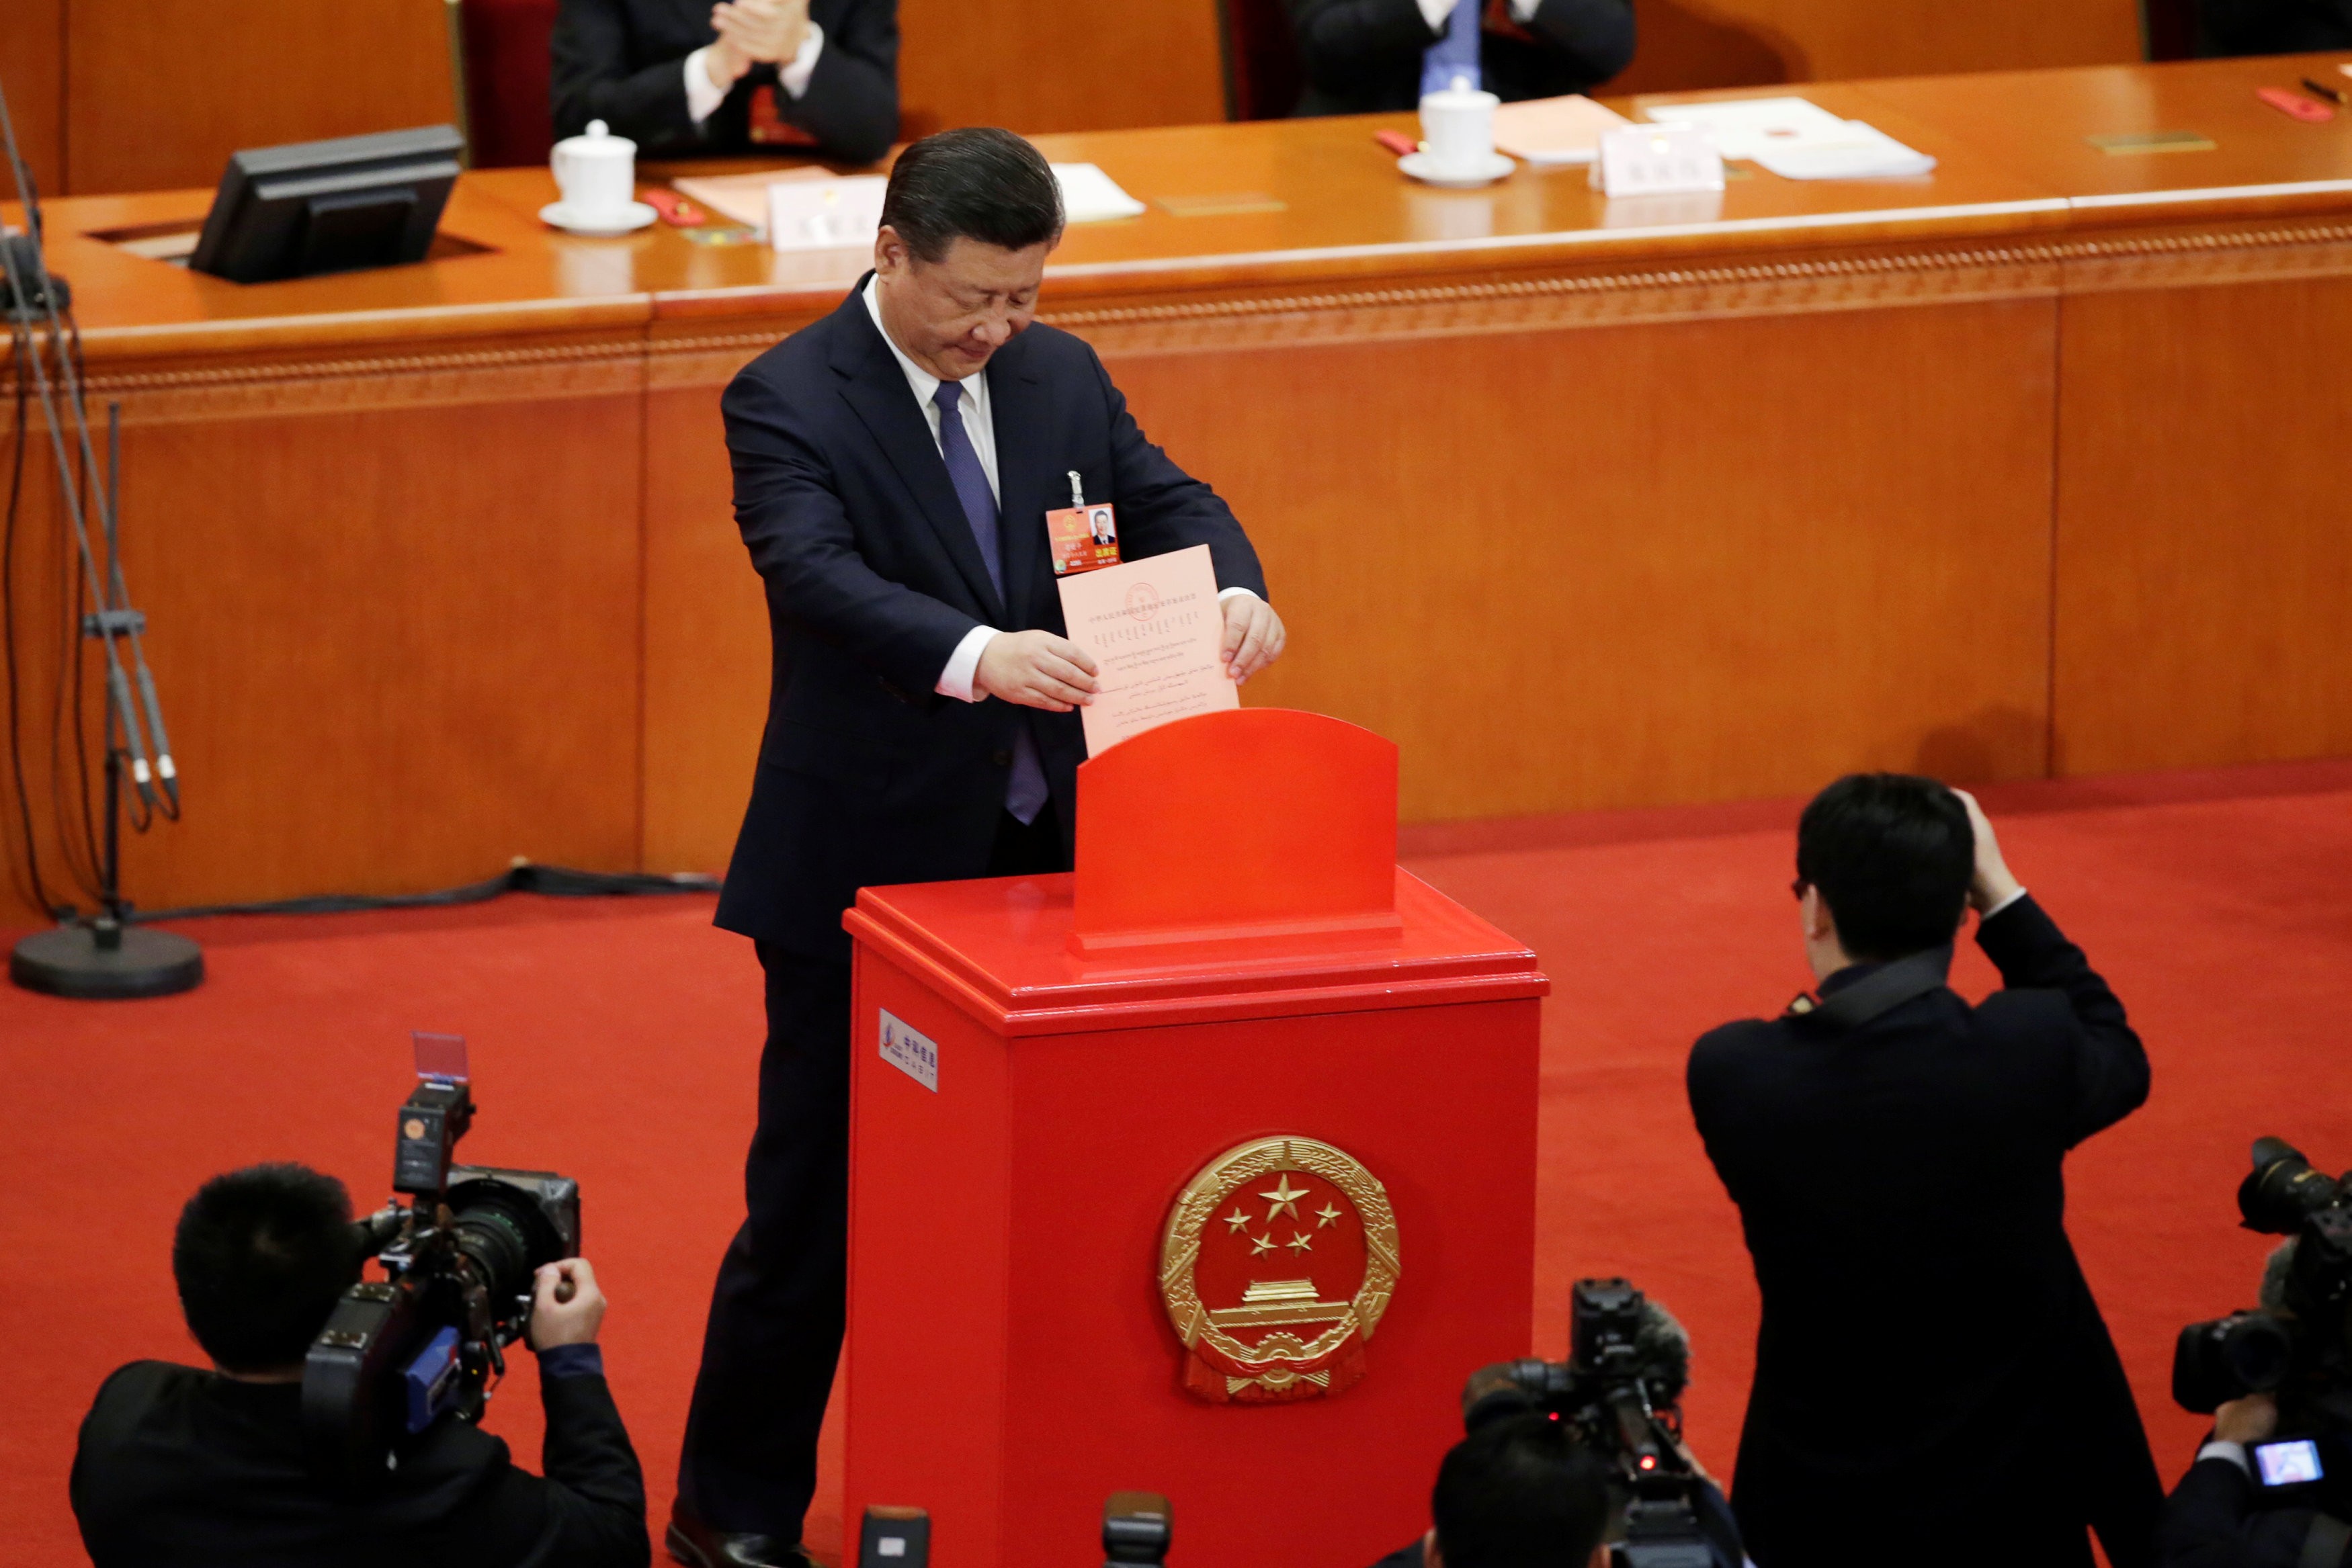 President Xi Jinping casts his ballot in Beijing on Sunday in a vote on constitutional revisions that removed the presidential term limit, among other changes. Photo: Reuters